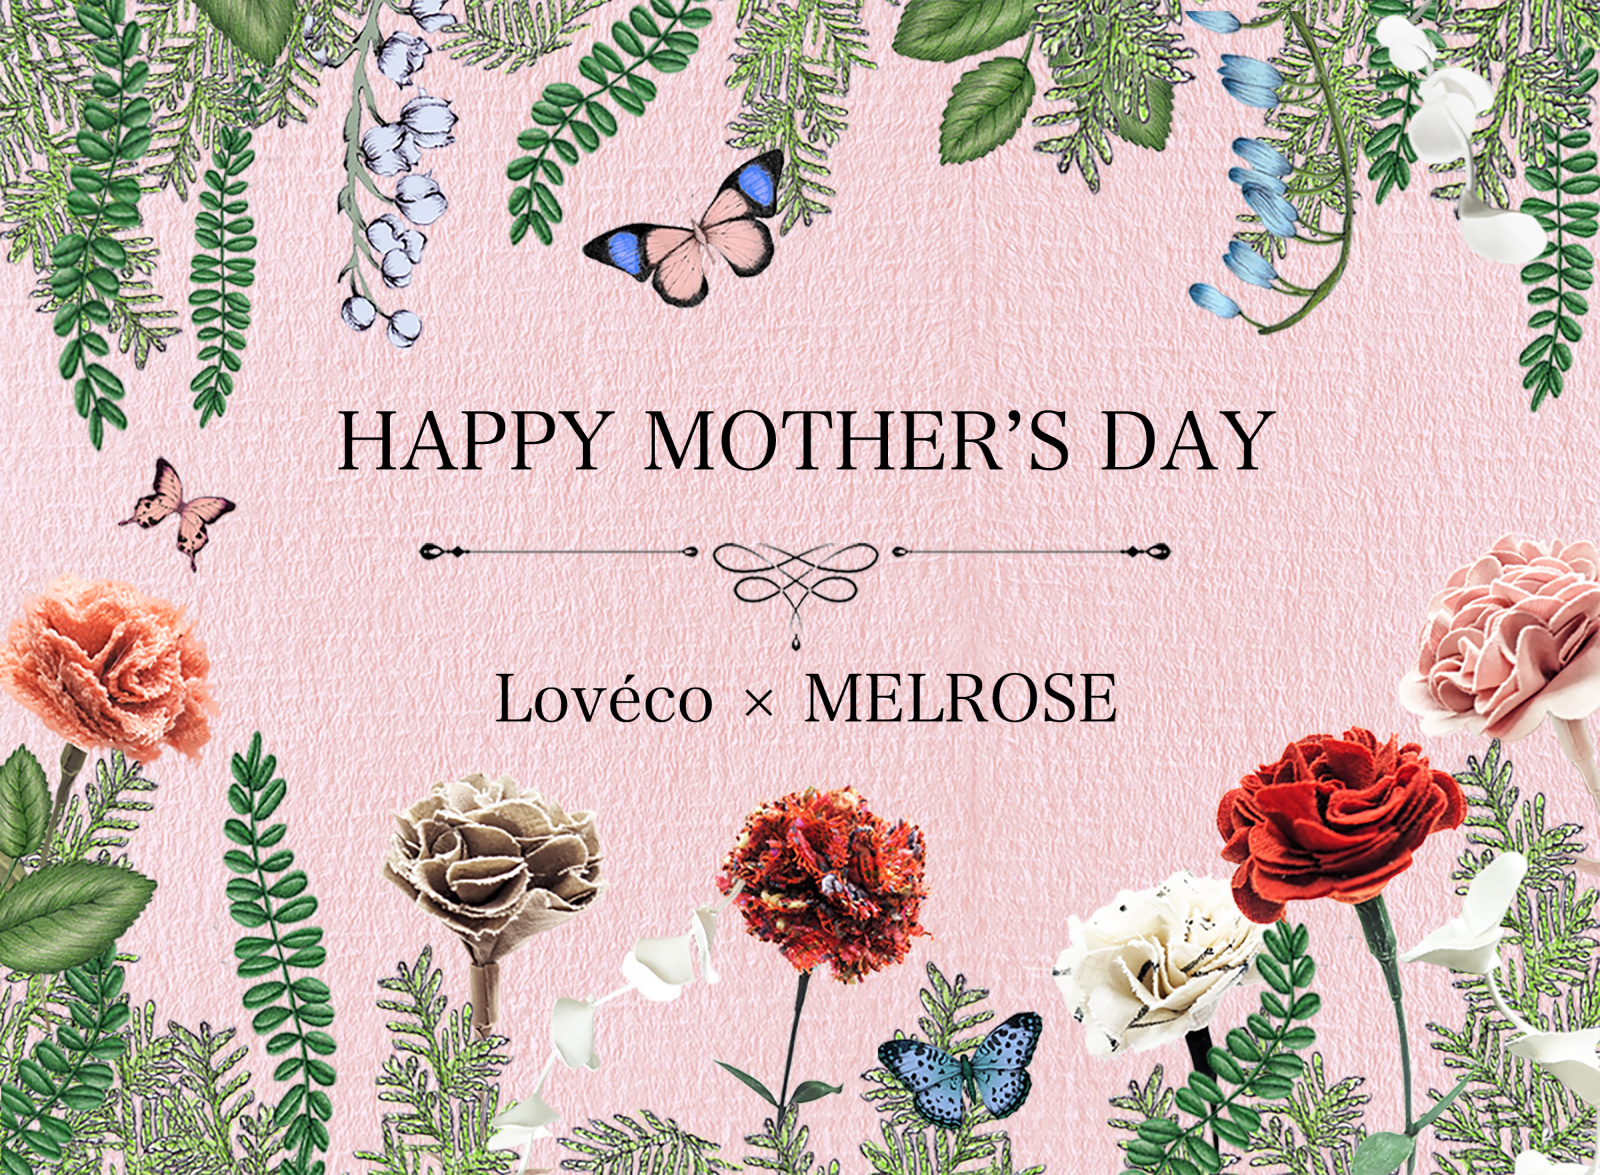 HAPPY MOTHER'S DAY Loveco x MELROSE